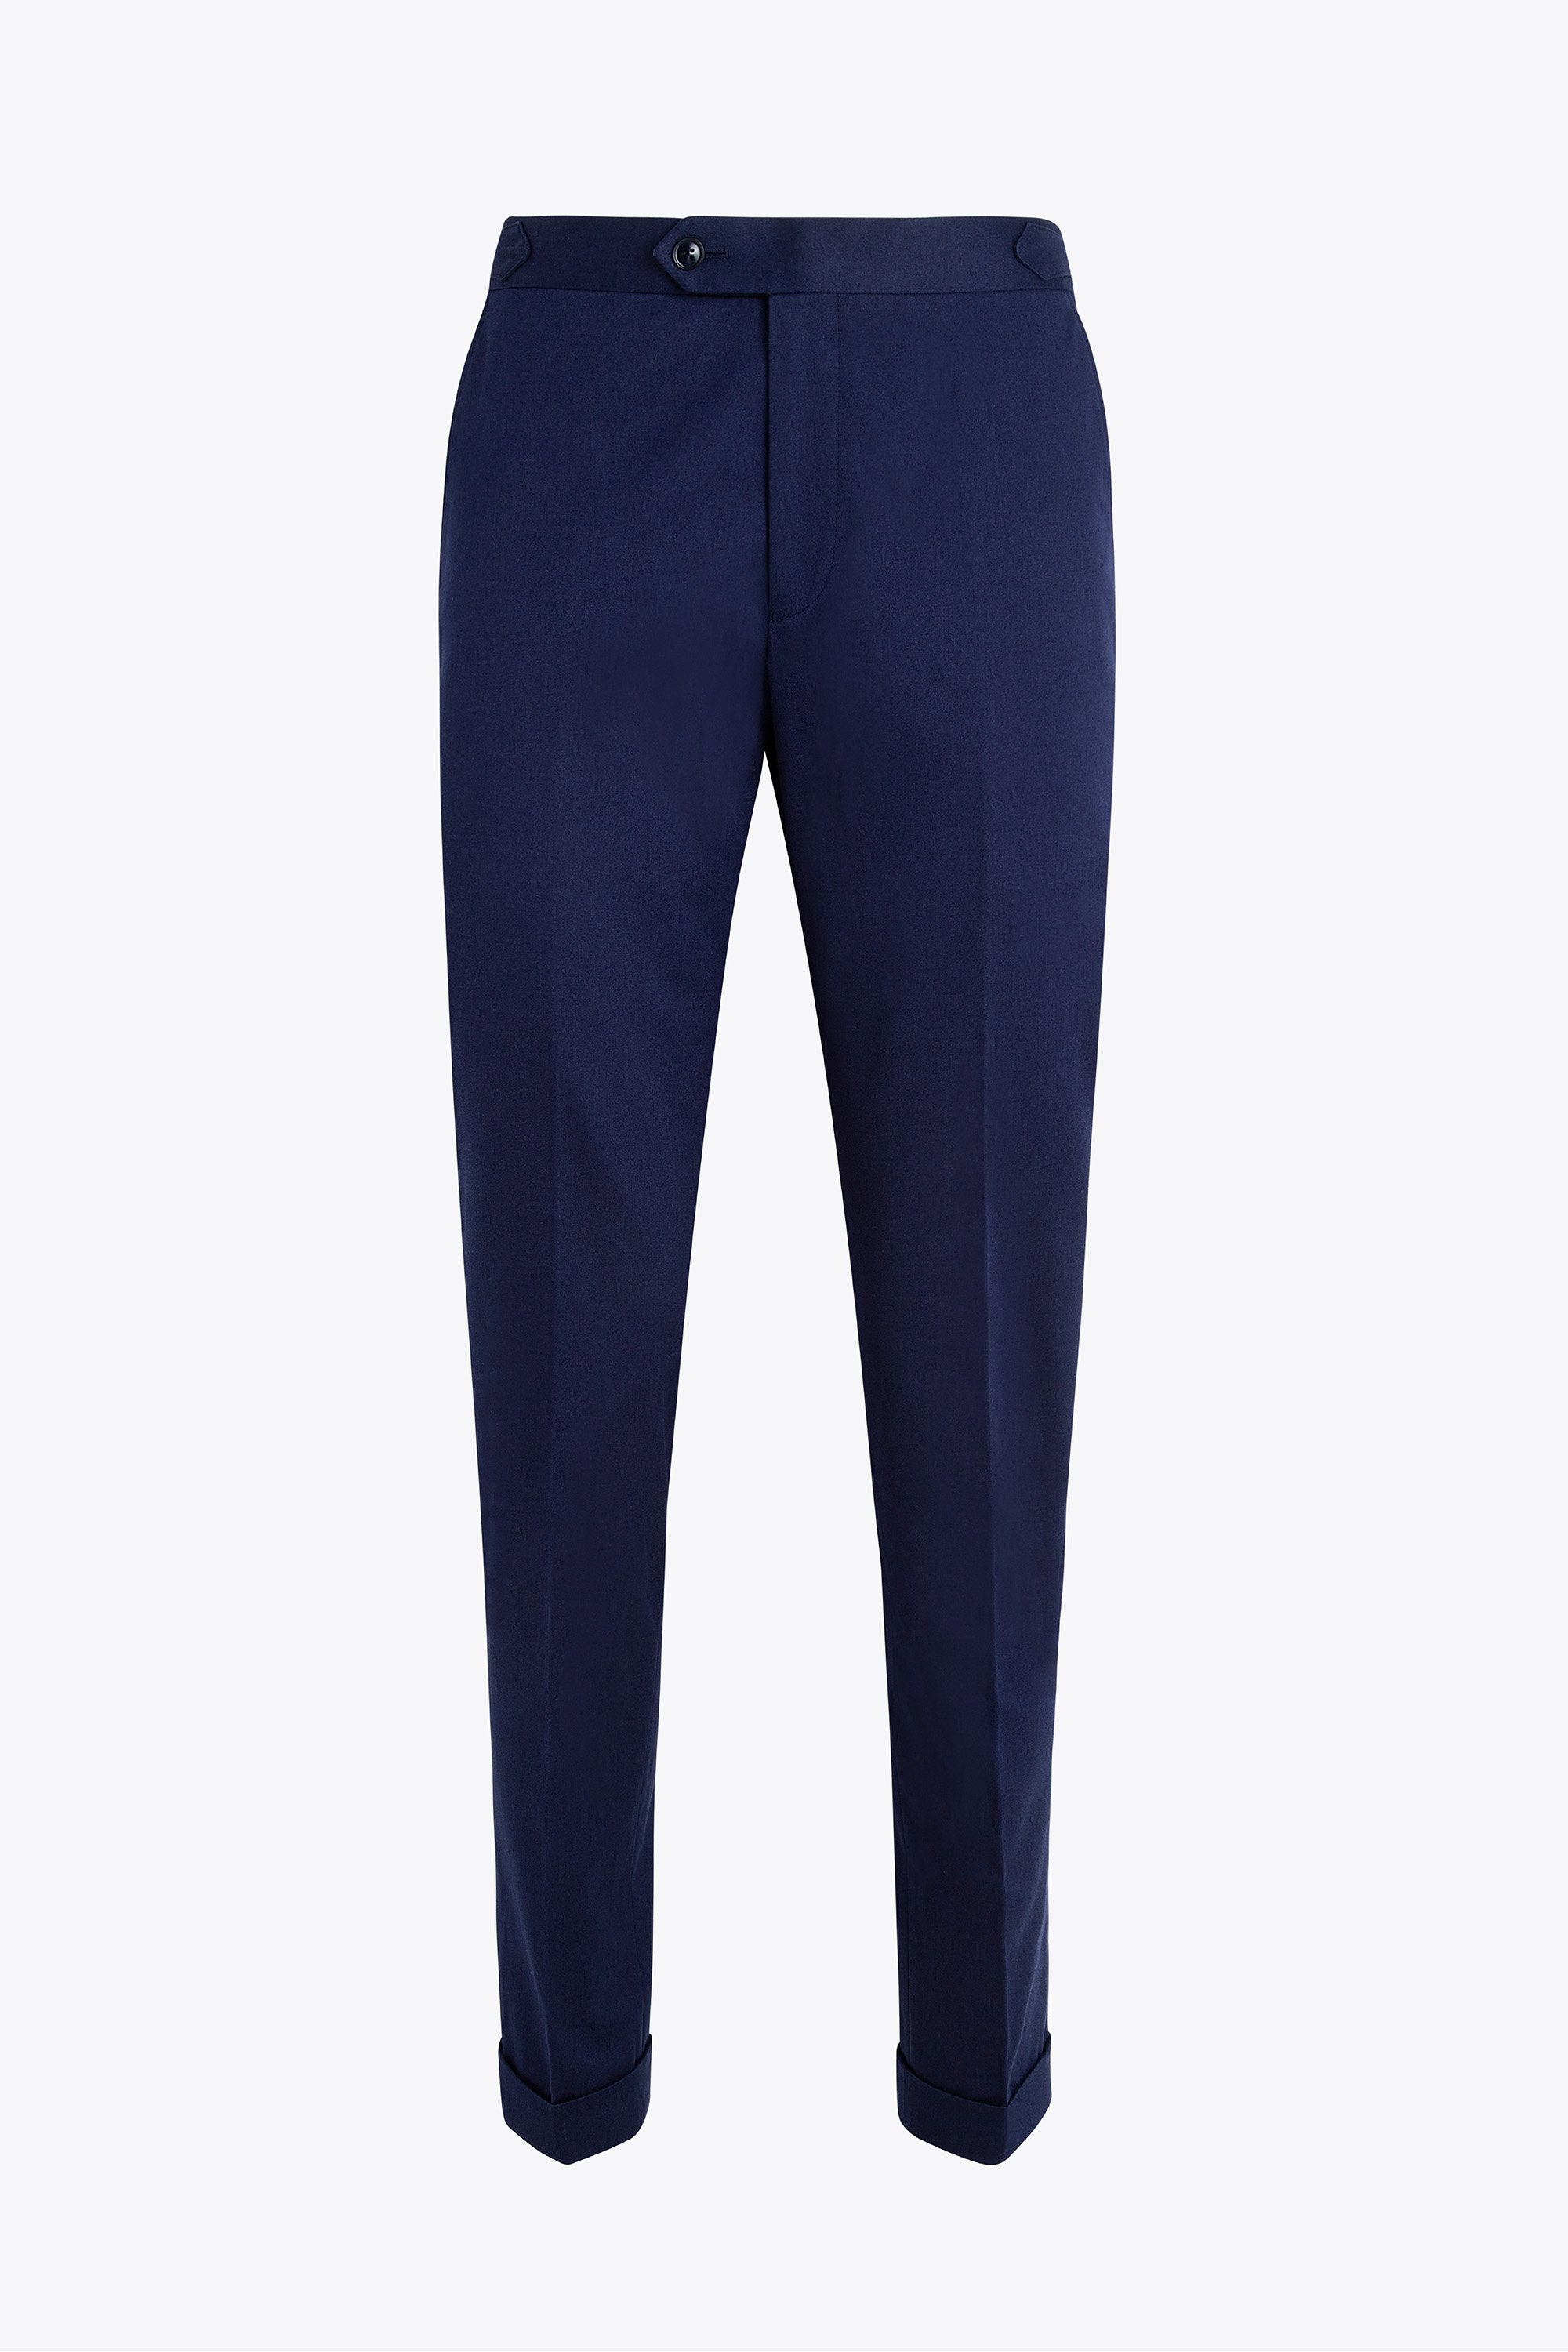 Navy Solid Plain Weave Trousers